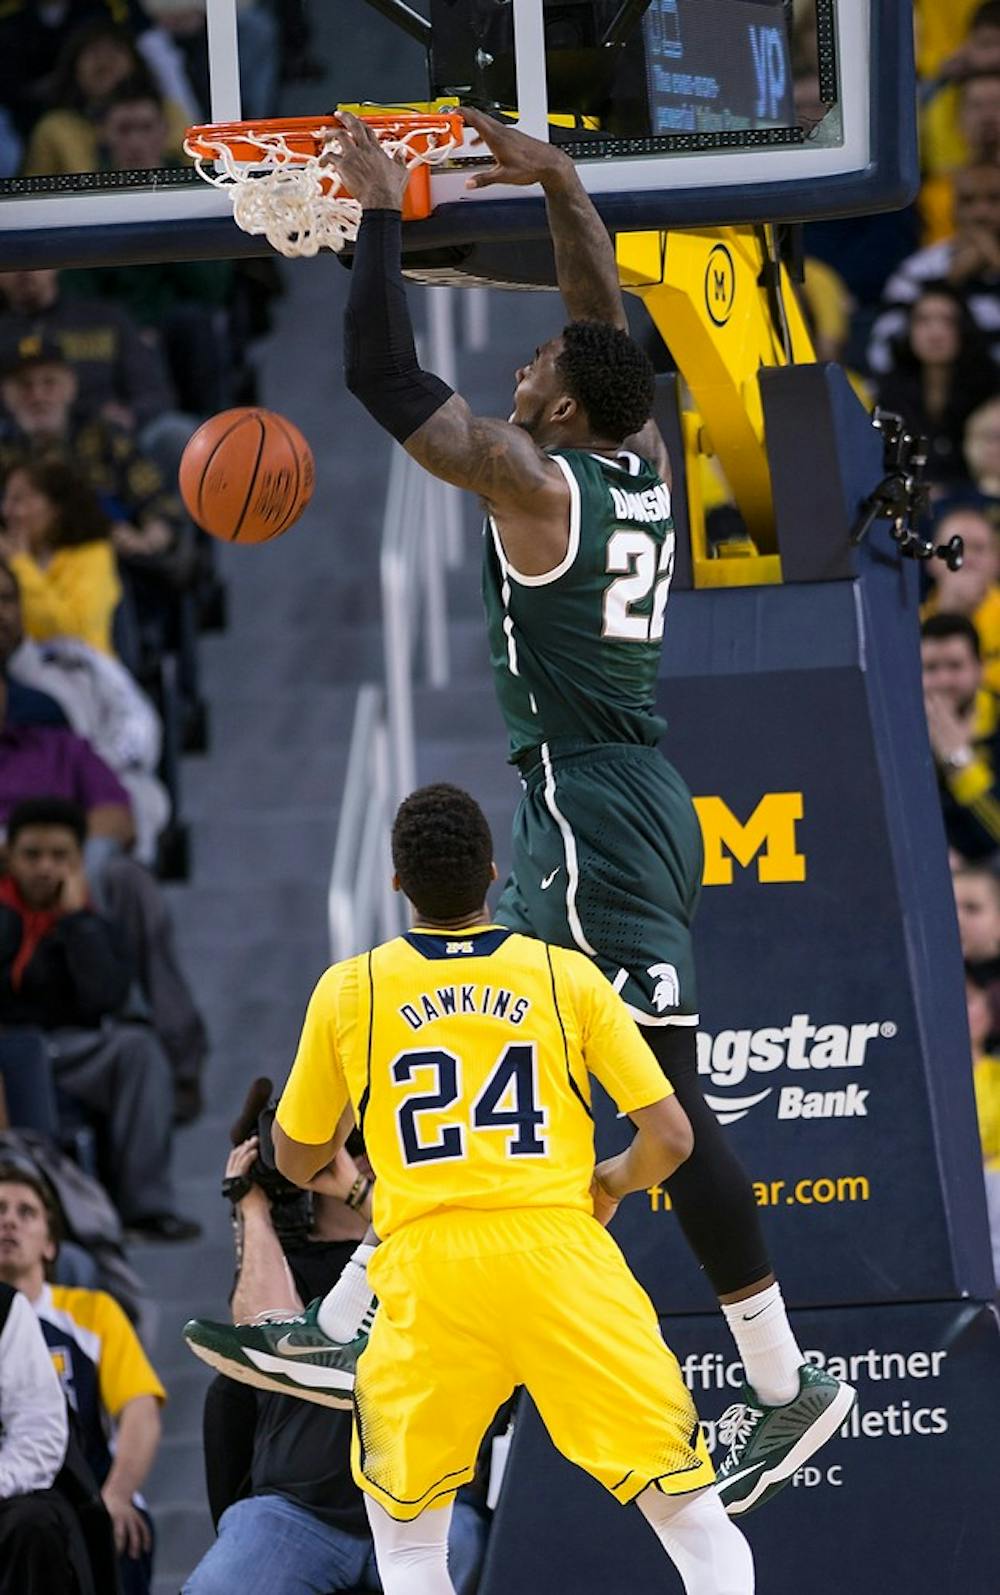 <p>Senior guard/forward Branden Dawson scores a goal Feb. 17, 2015, during the game against Michigan at Crisler Center in Ann Arbor. The Spartans are leading against the Wolverines at halftime, 38-23. Emily Nagle/The State News</p>